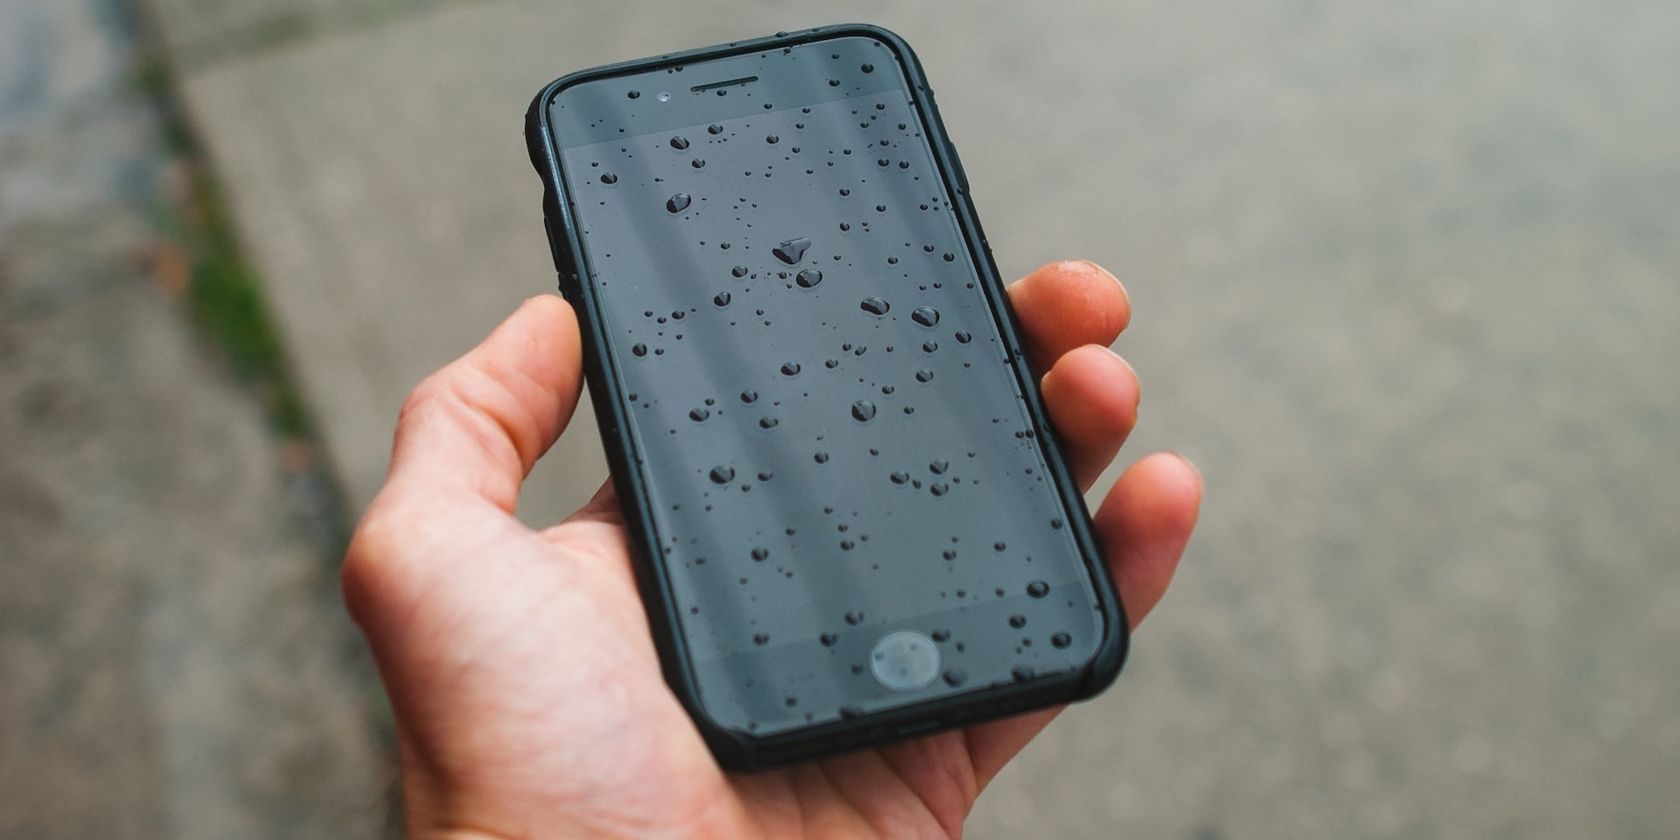 A hand holding a phone with droplets of water on the screen